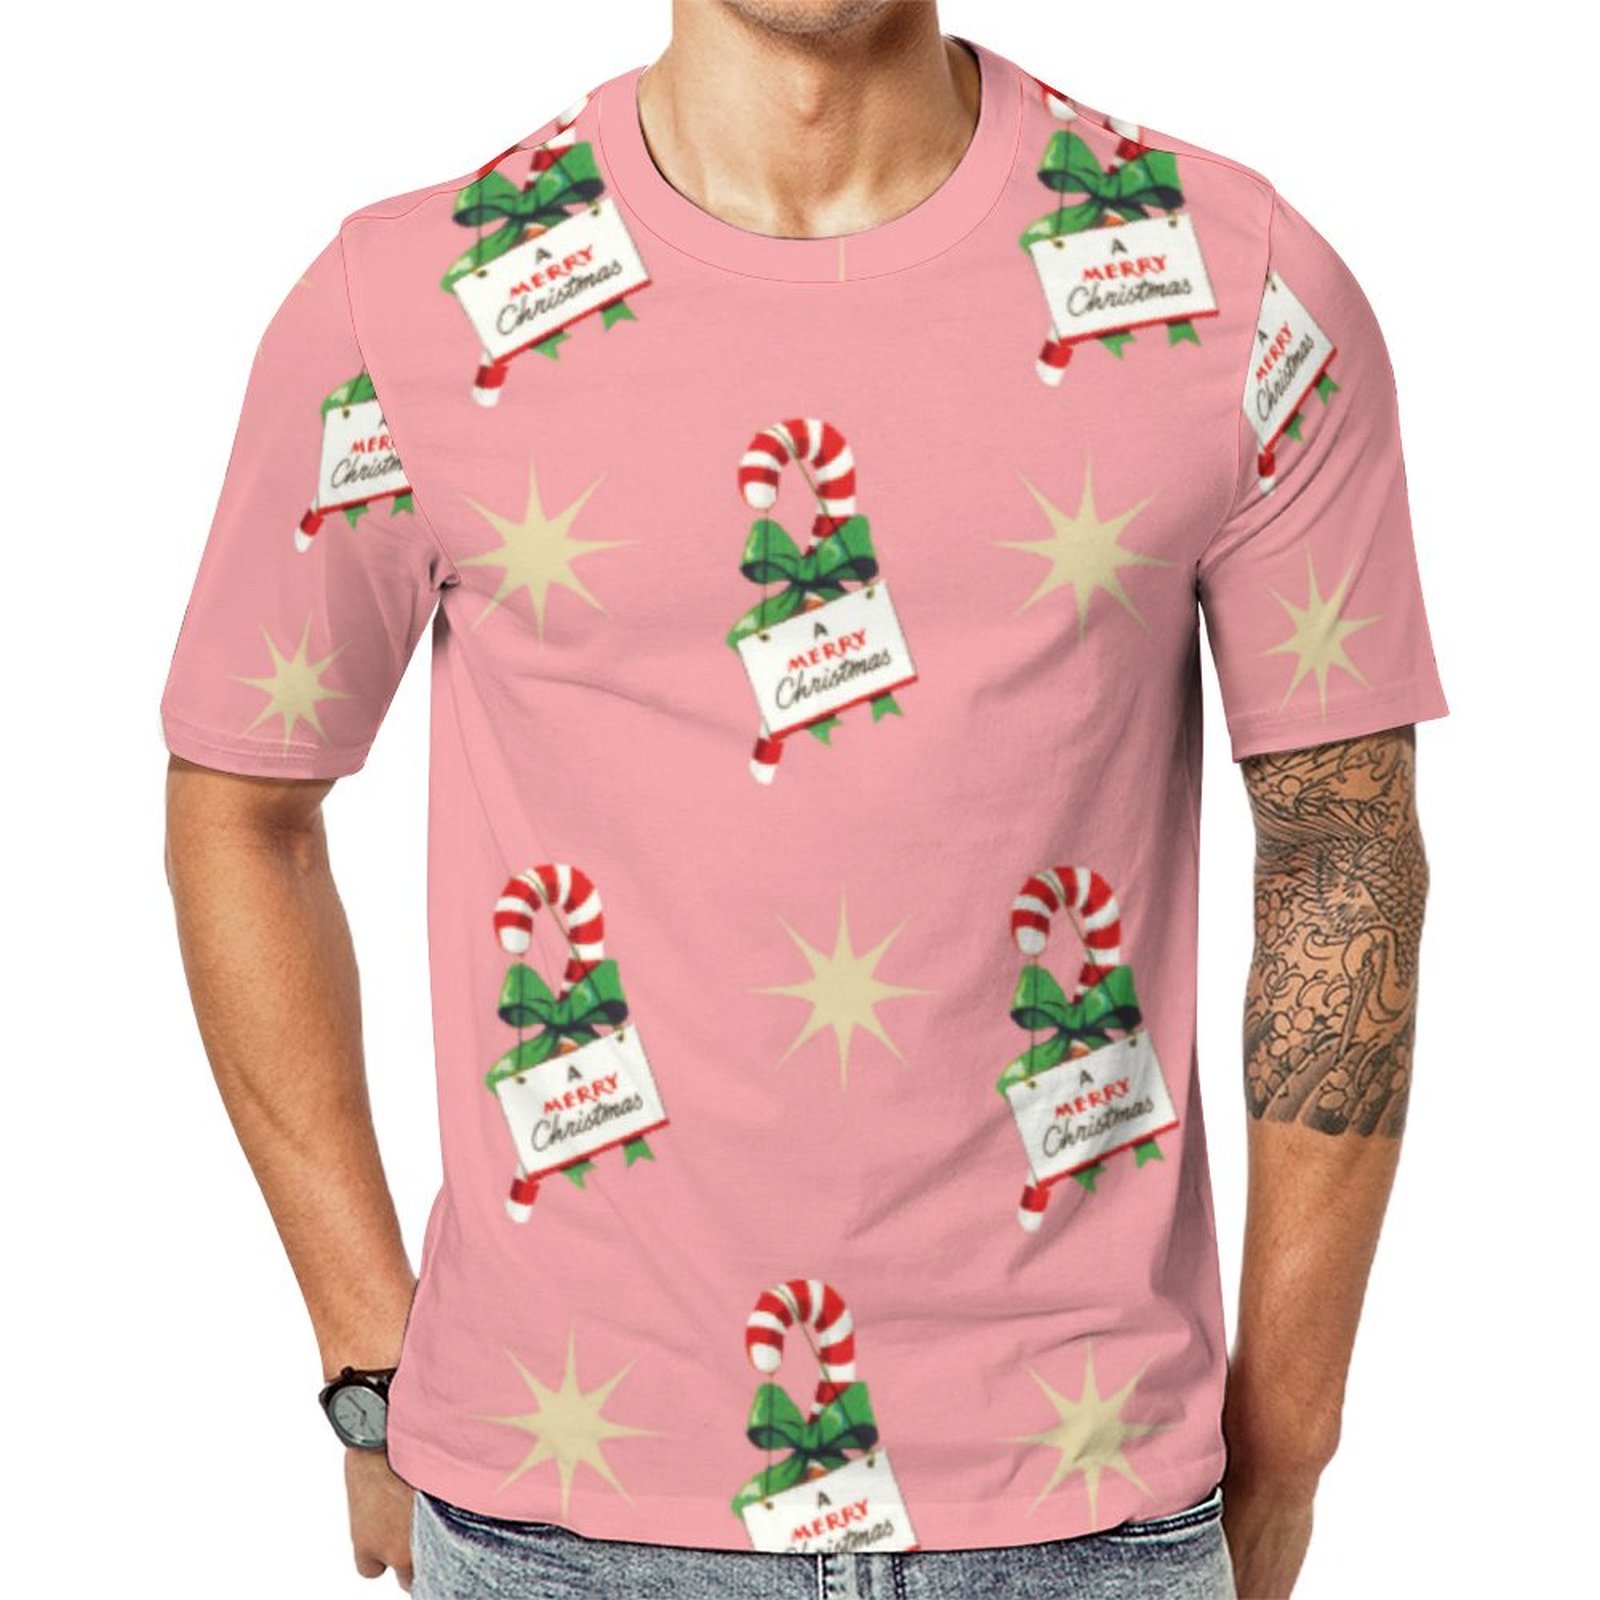 Vintage Christmas Candy Canes With Pink Short Sleeve Print Unisex Tshirt Summer Casual Tees for Men and Women Coolcoshirts